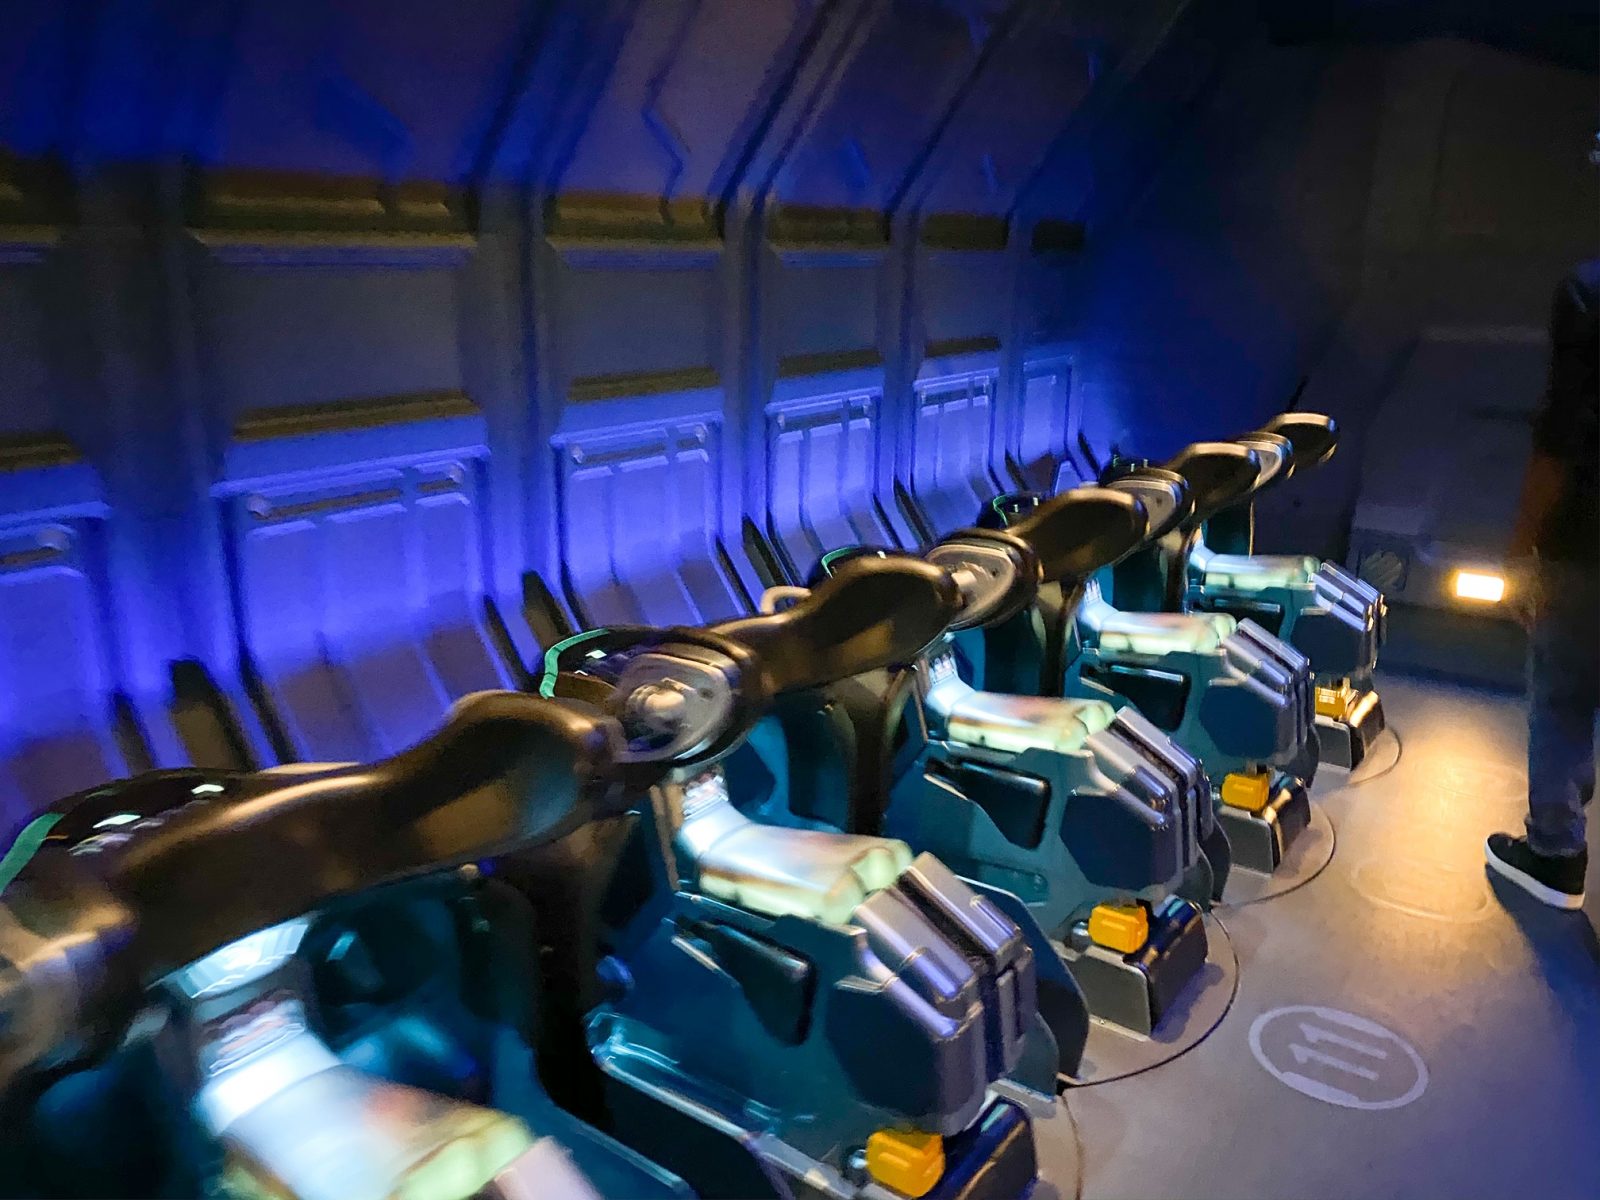 The flight of passage ride at Animal Kingdom; photo is of the seats which are the base of the ride